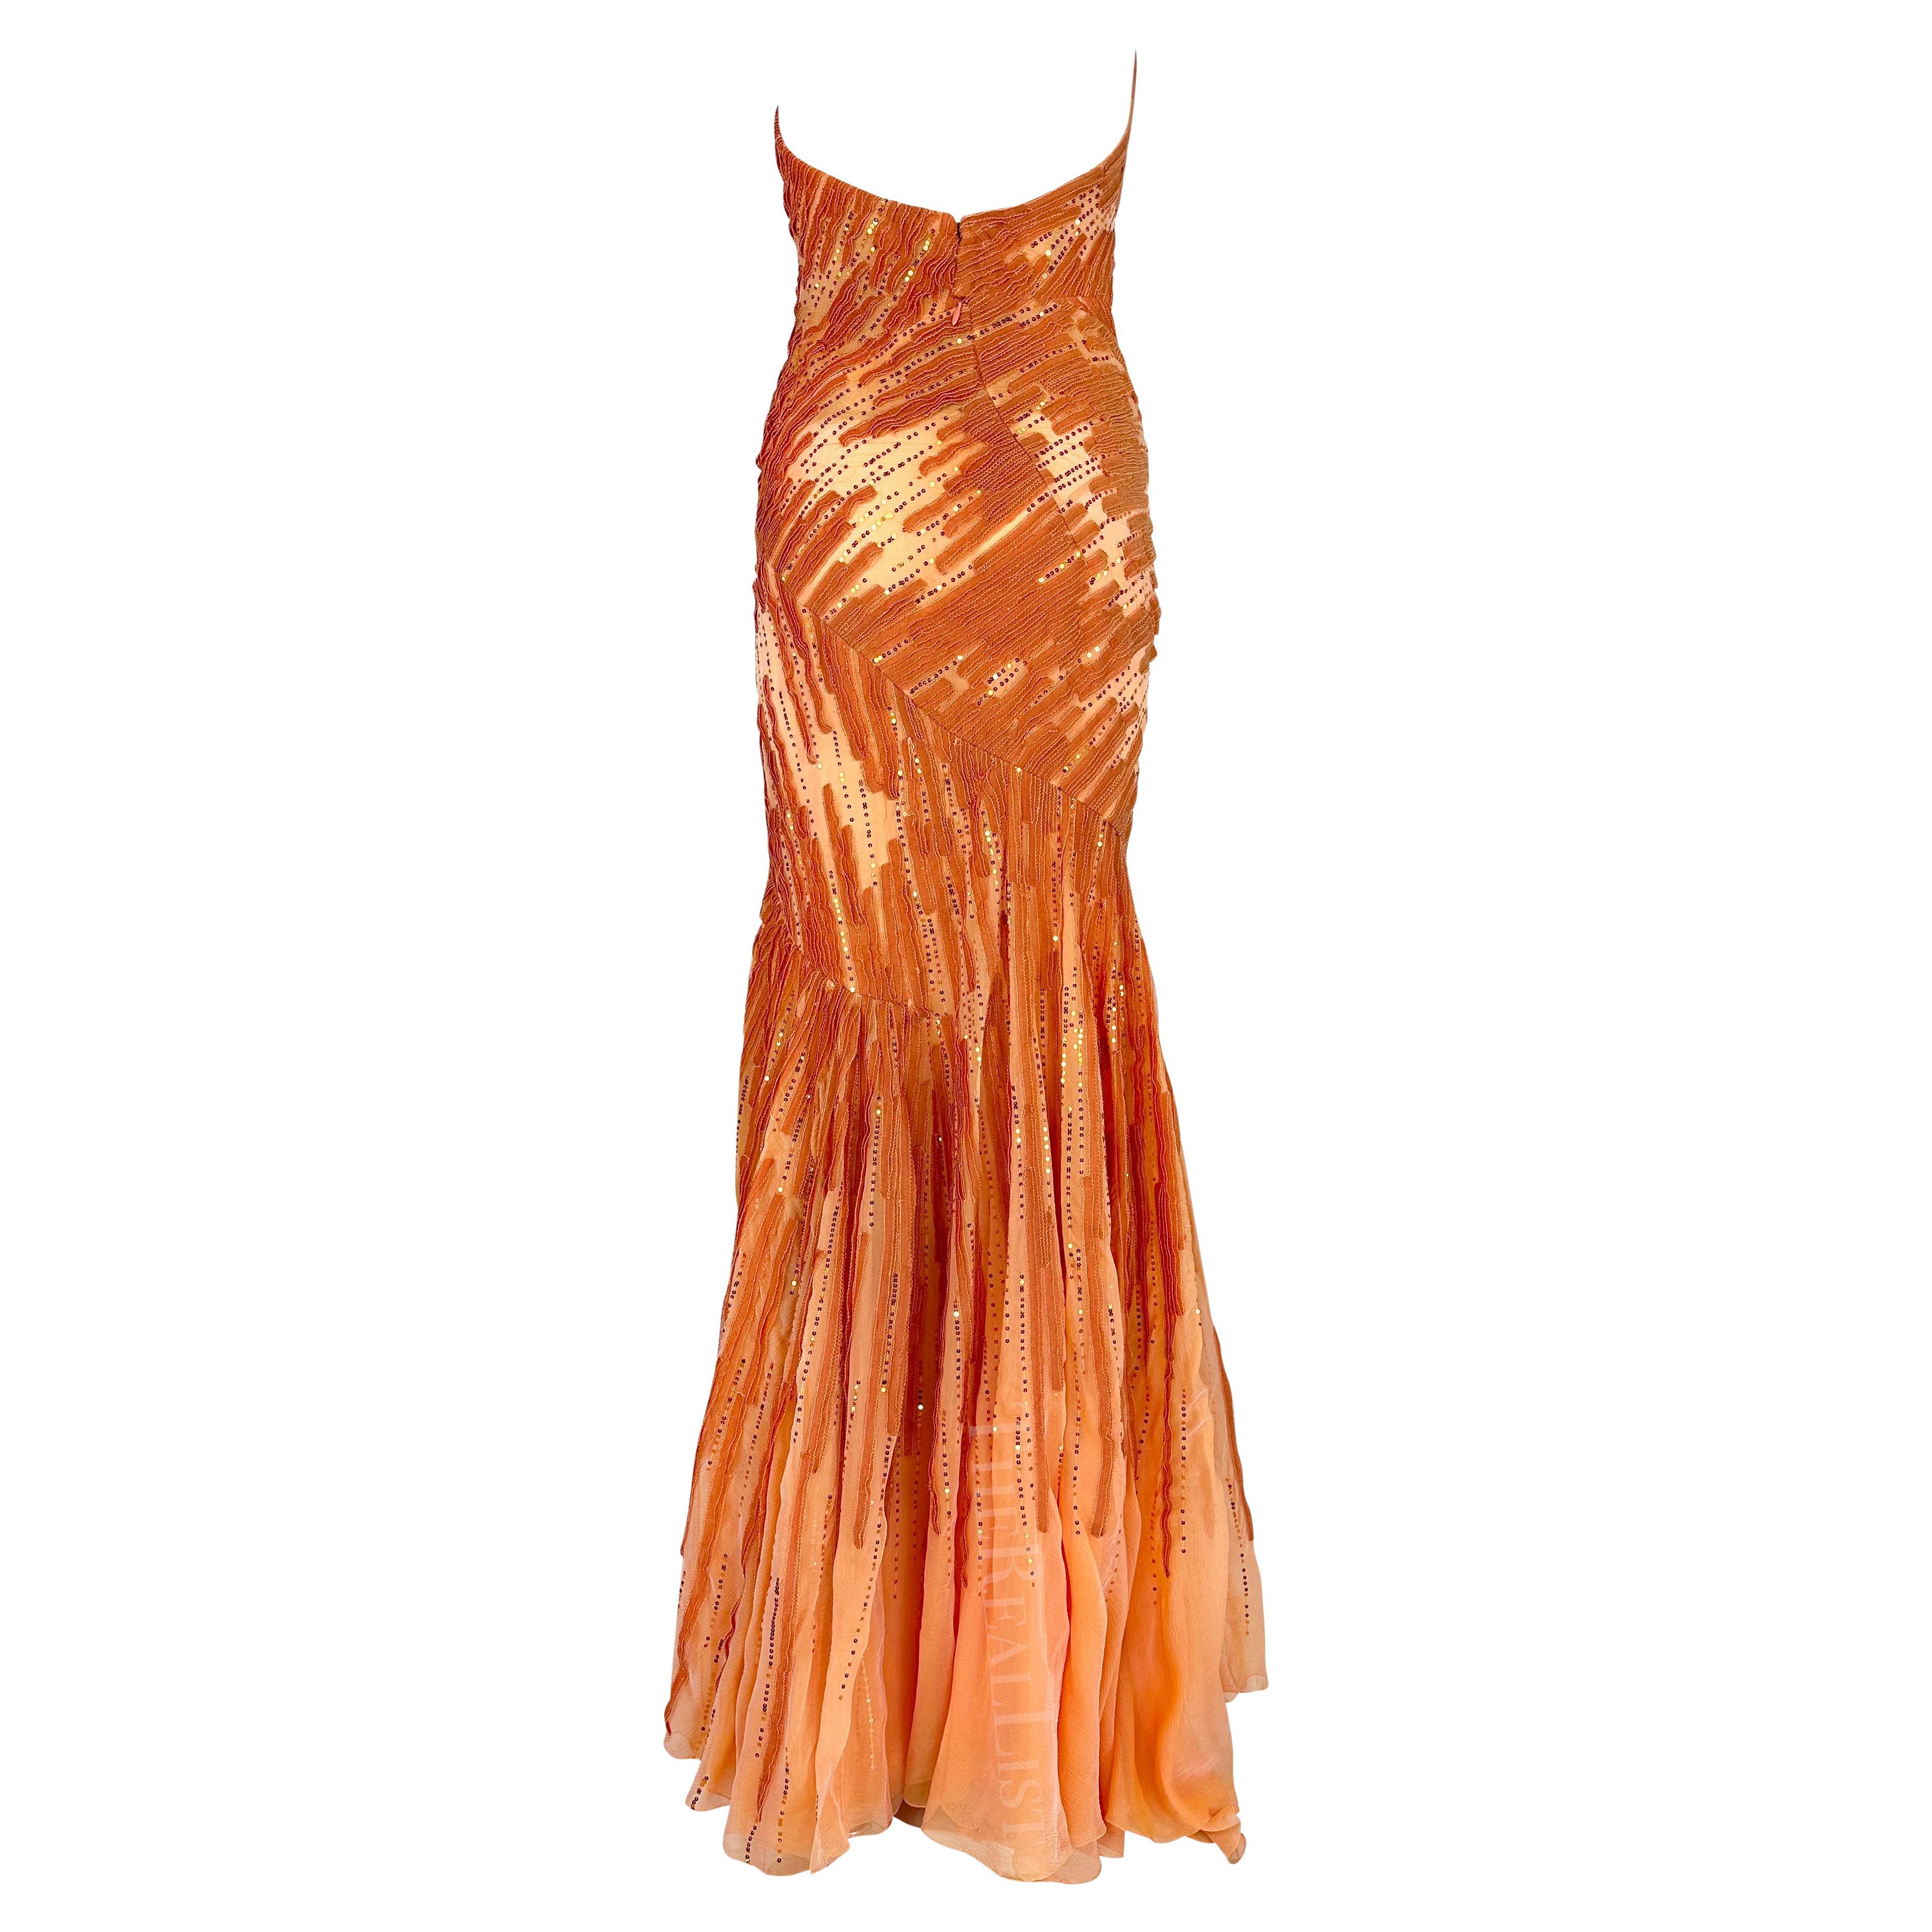 F/W 2002 Atelier Versace by Donatella Maya Rudolph Sheer Orange Sequin Gown For Sale 9